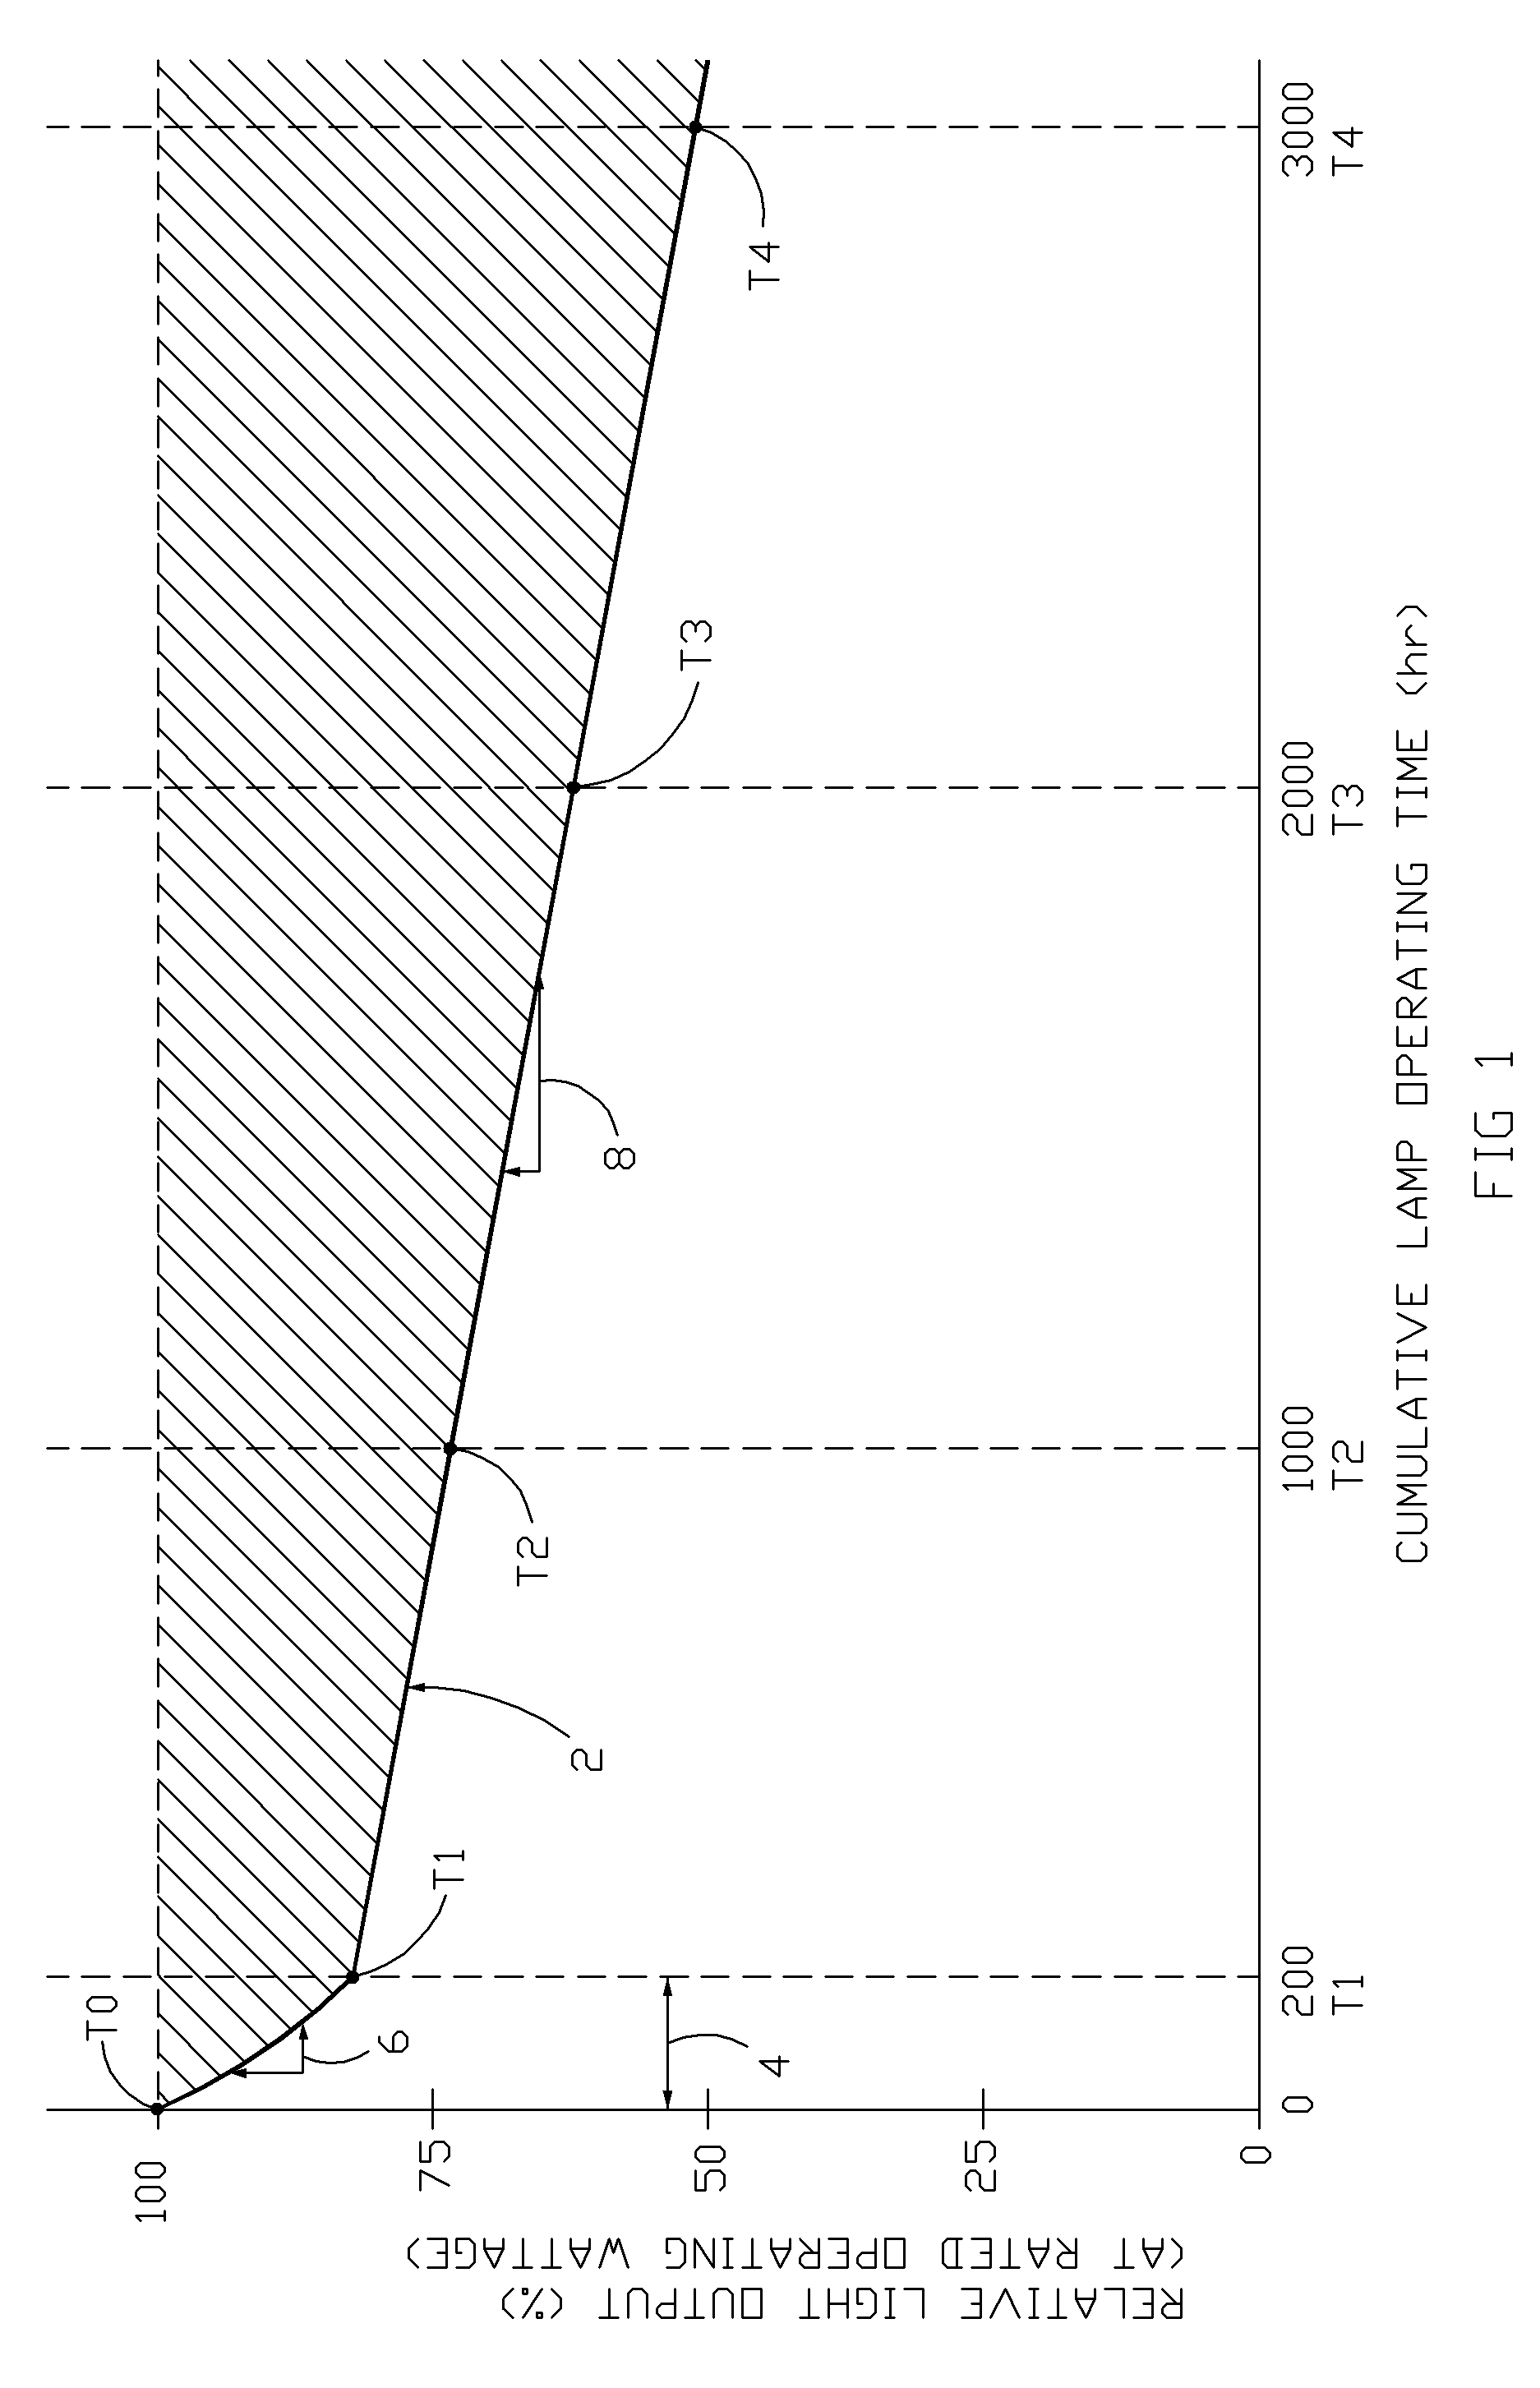 Apparatus, method, and system for improved switching methods for power adjustments in light sources